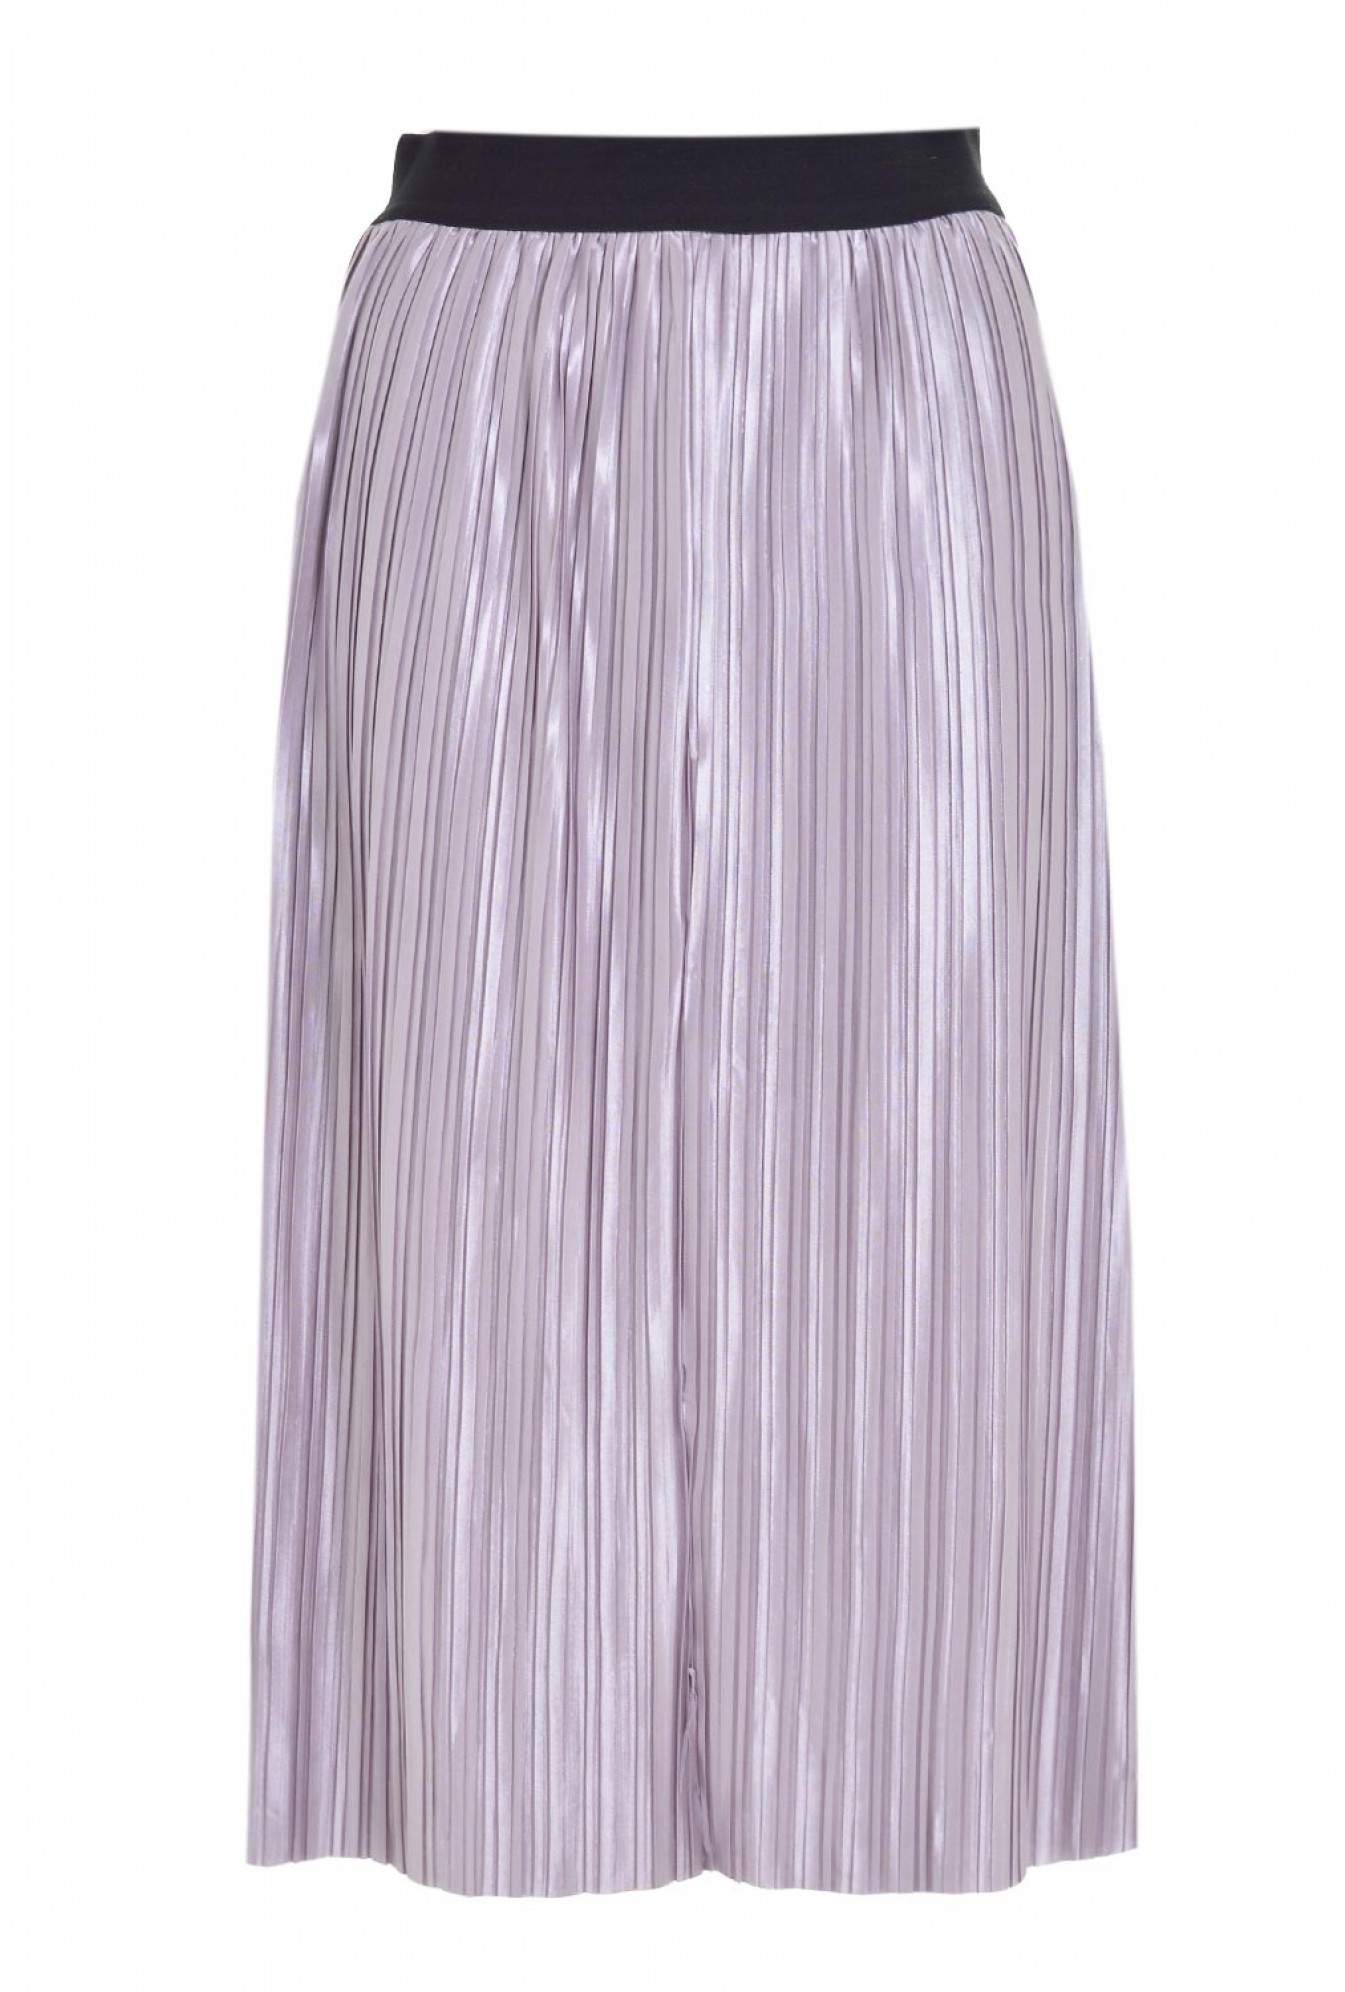 Jealousy Melody Metallic Pleated Skirt in Silver | iCLOTHING